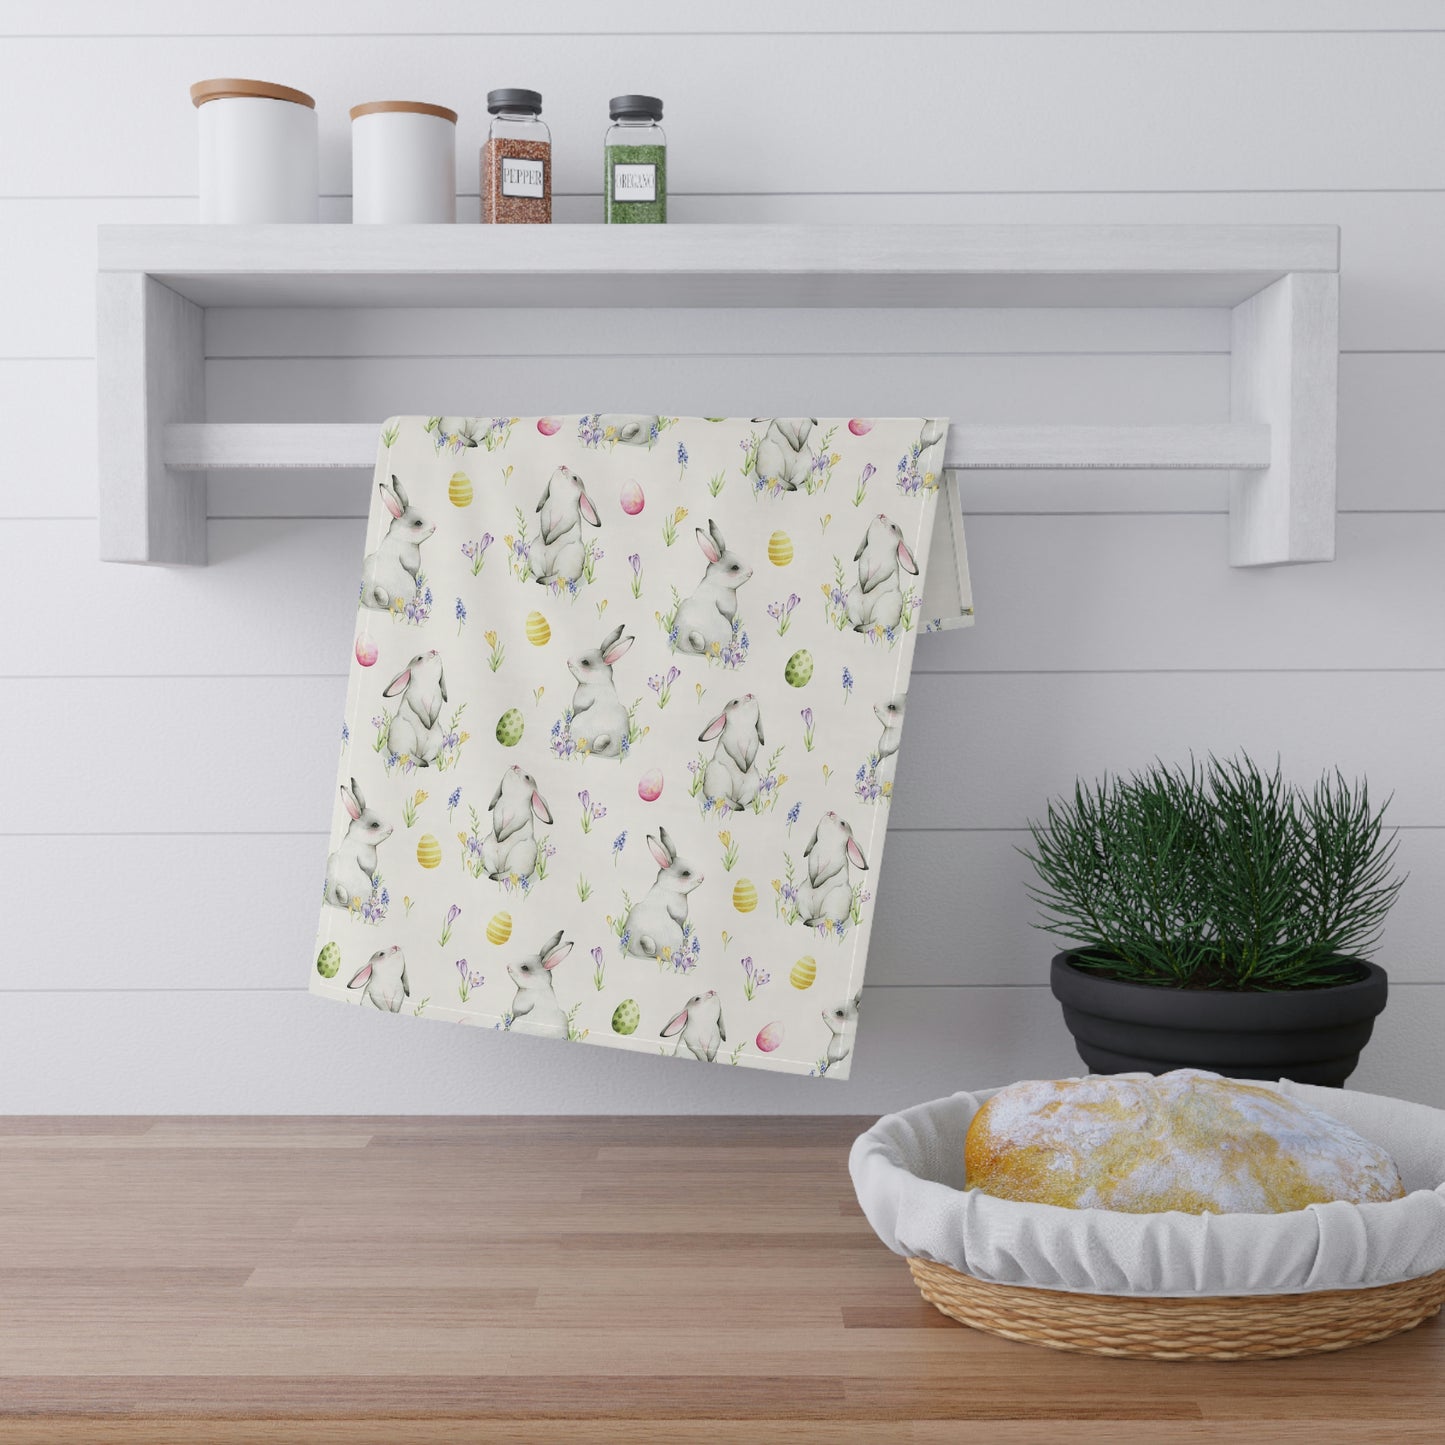 Cottontail Bunnies and Eggs Kitchen Towel